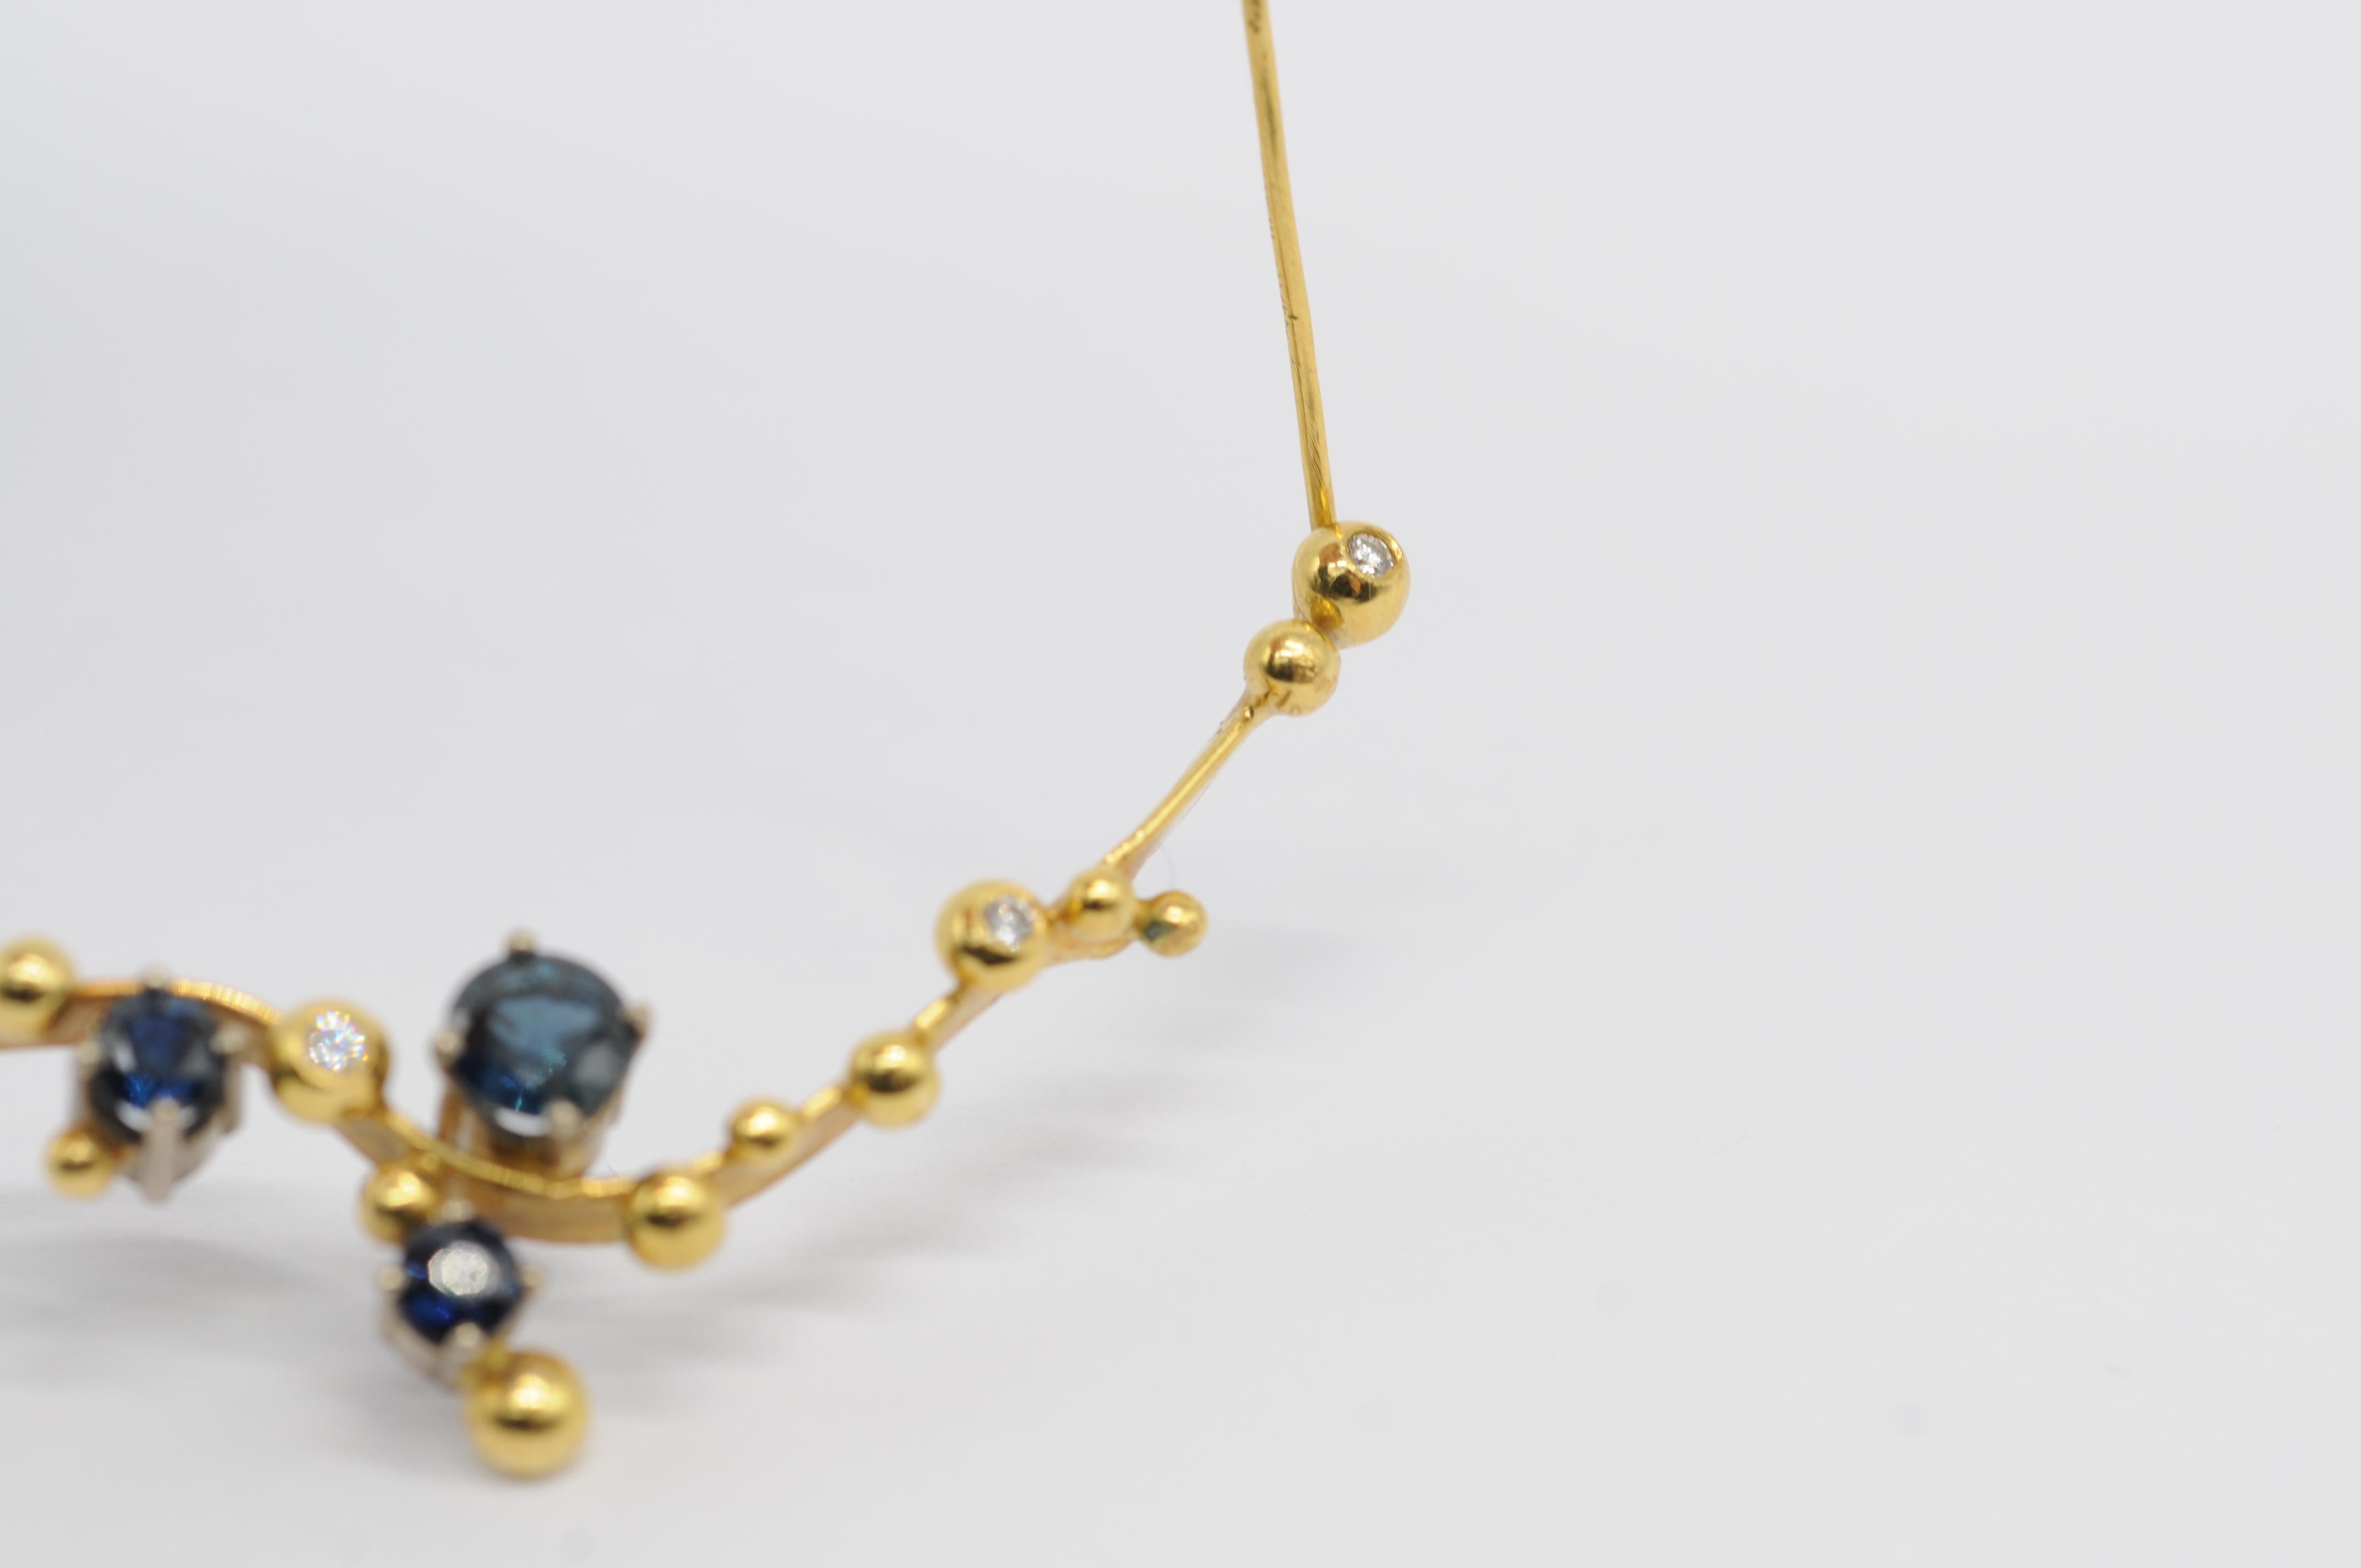 Majestic Necklace in 18k yellow gold with diamond and sapphire For Sale 3